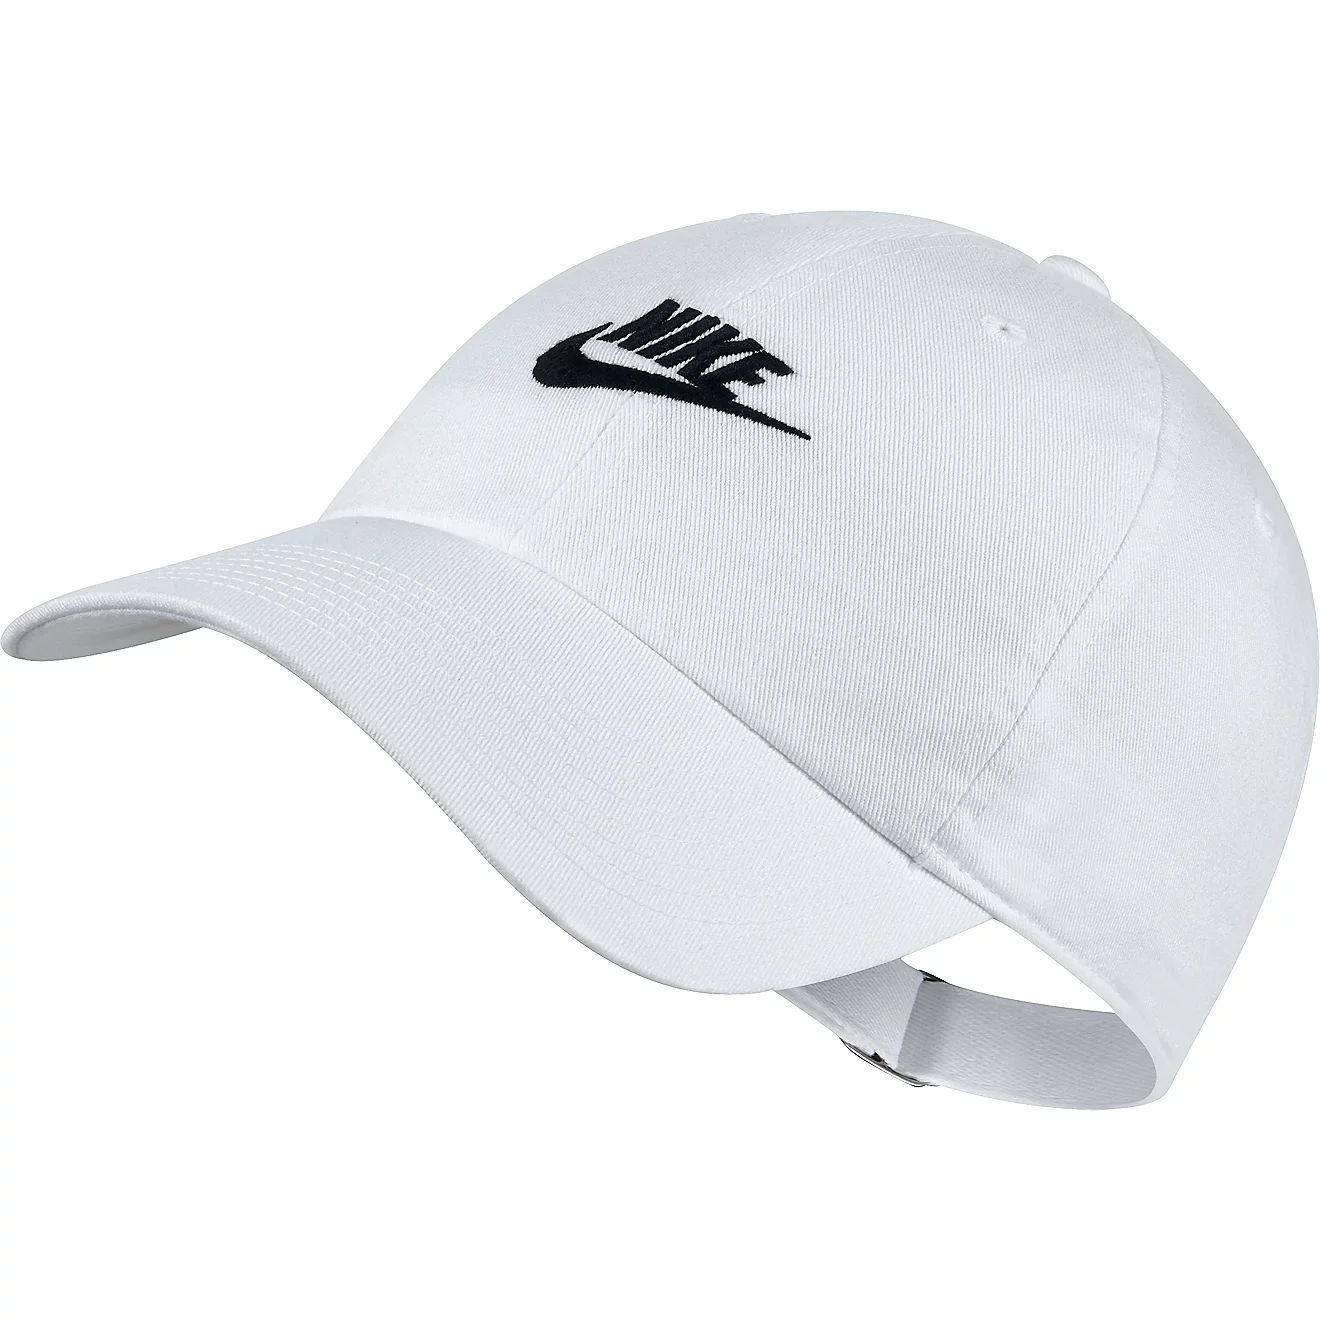 Nike Adults' Futura Washed Cap | Academy Sports + Outdoors